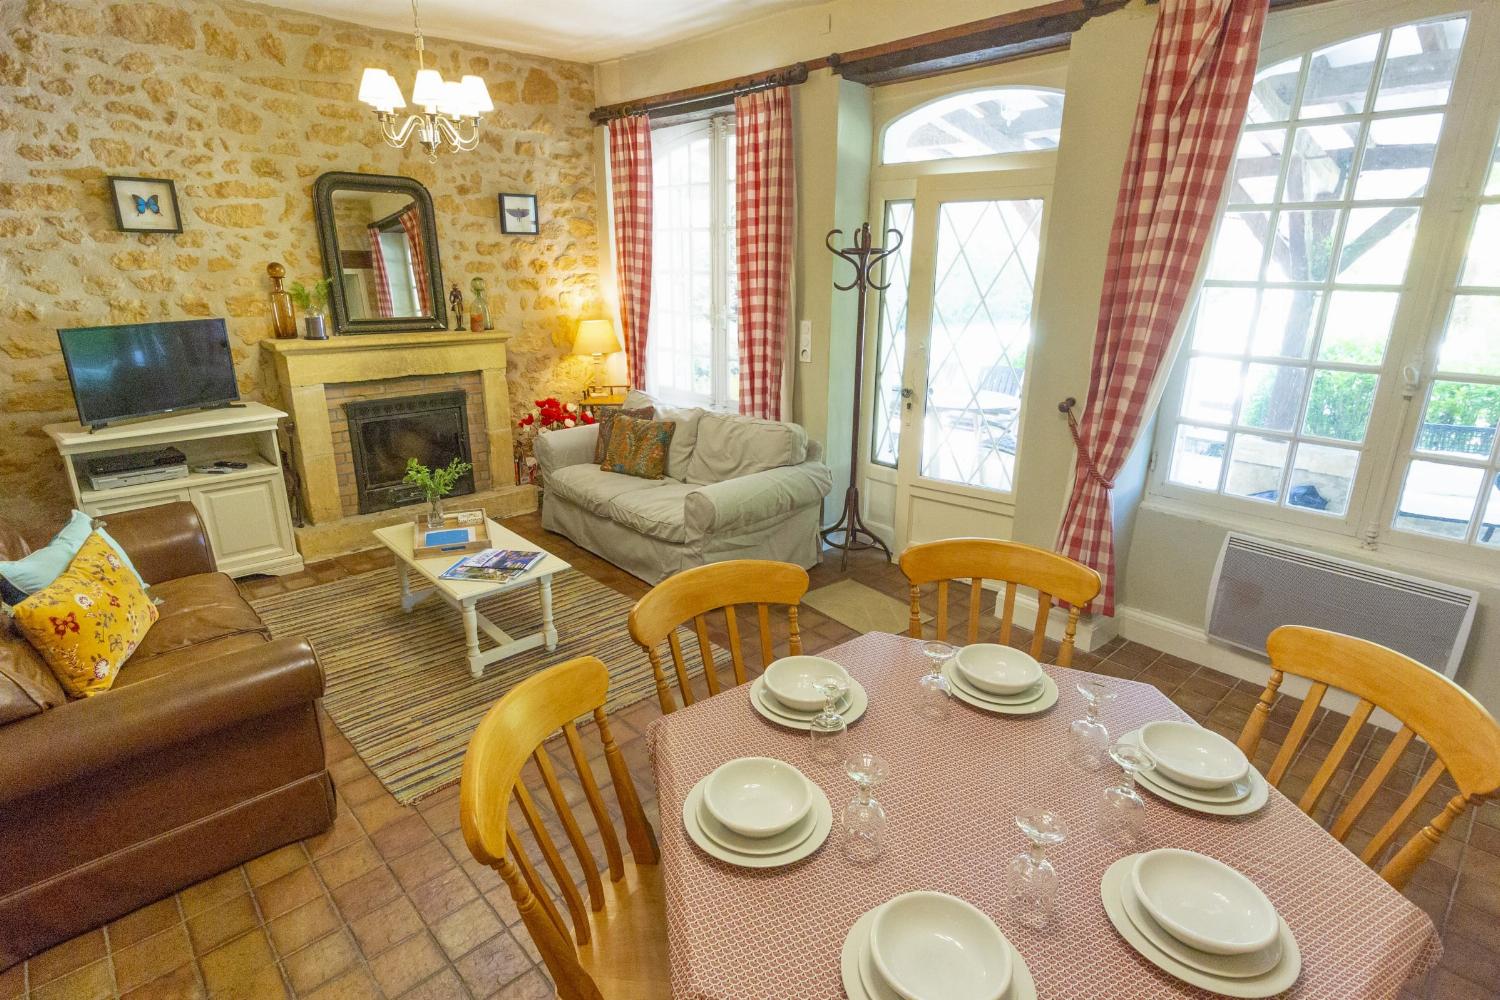 Dining room | Holiday home in Sarlat